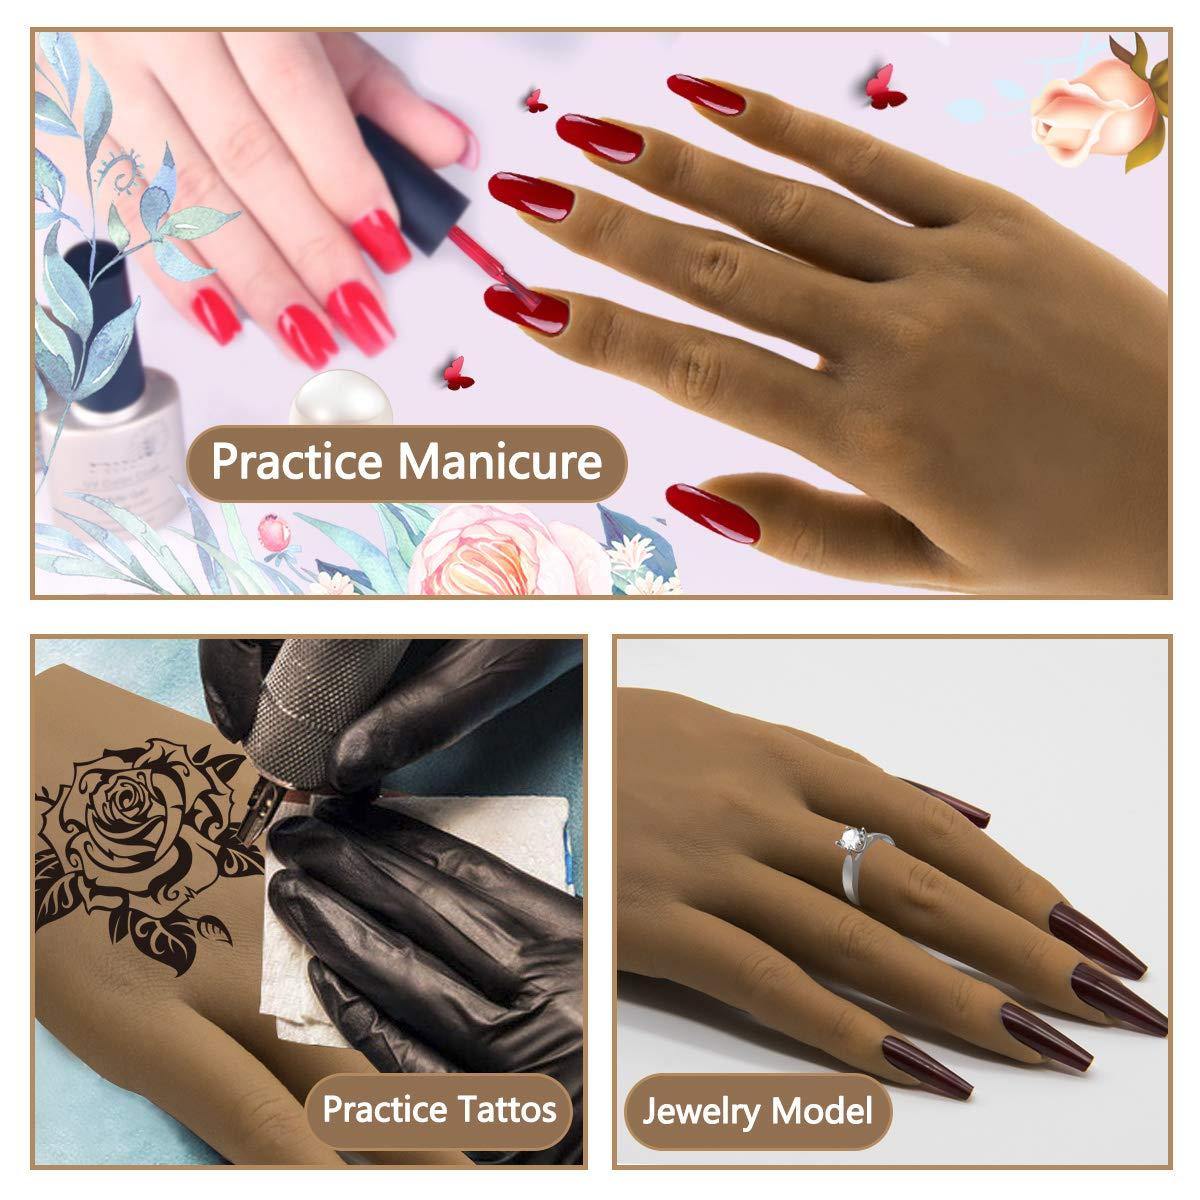 Marvels hair Studio-unisex salon - MARVEL HAIR STUDIO PRESENTS 🌟NAIL ART  COURSE 🌟 Learn professional nail art in just 3 days.. 👉🏻Corporate batch  who cannot give much time to learn!! 👉🏻Hand on